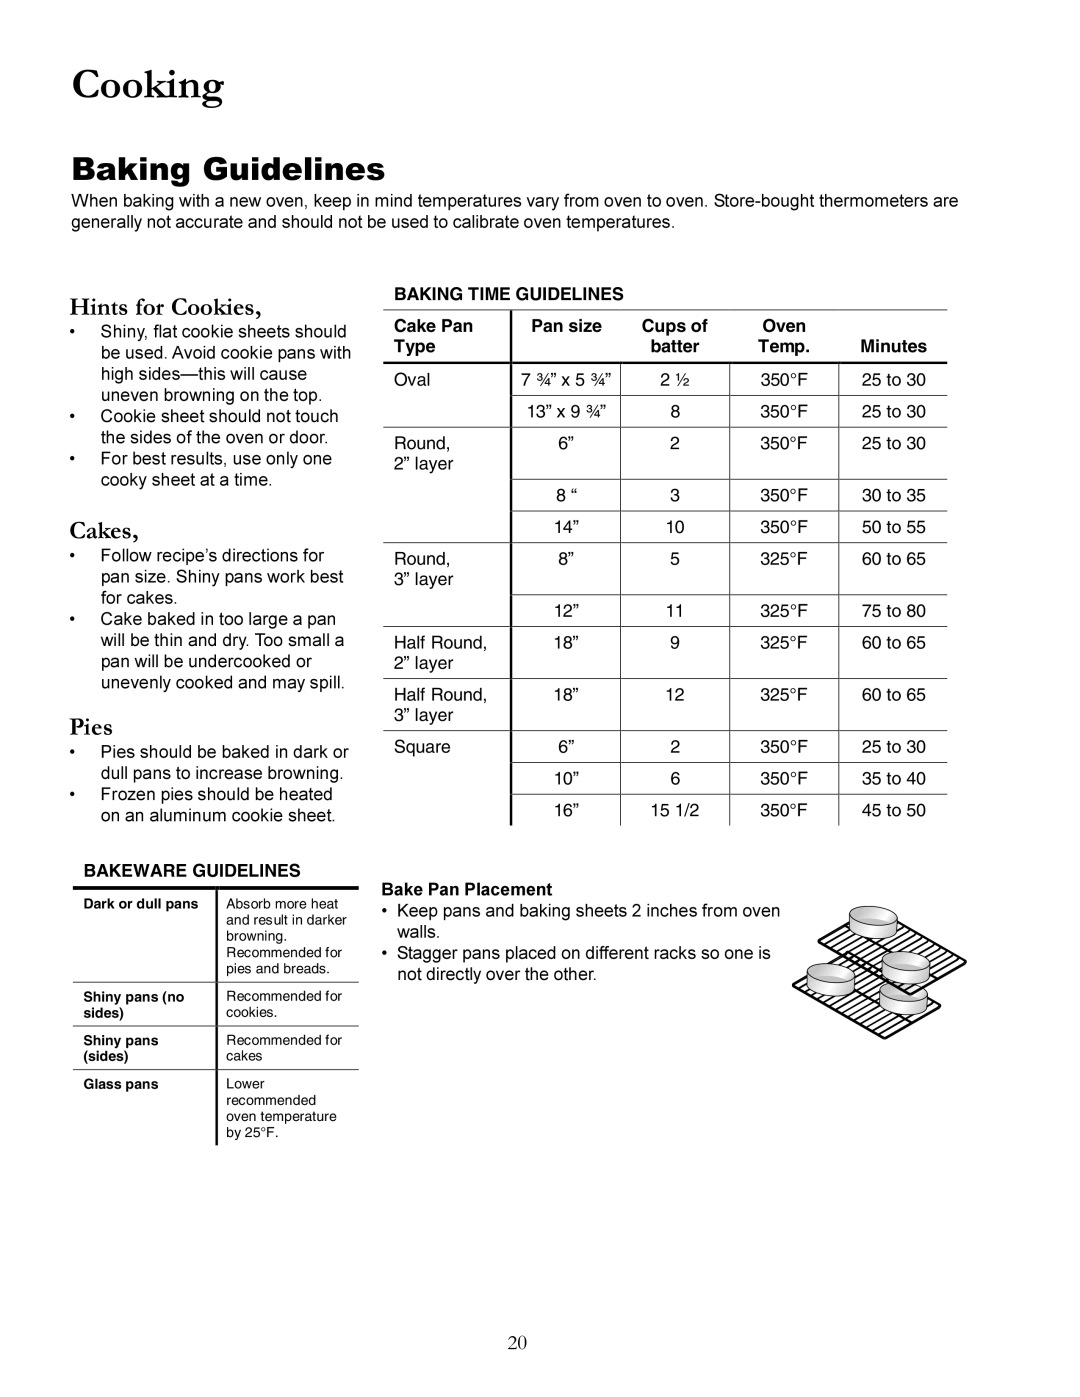 Amana The Big Oven Gas Range Cooking, Baking Guidelines, Hints for Cookies, Cakes, Pies, Bakeware Guidelines, Cake Pan 